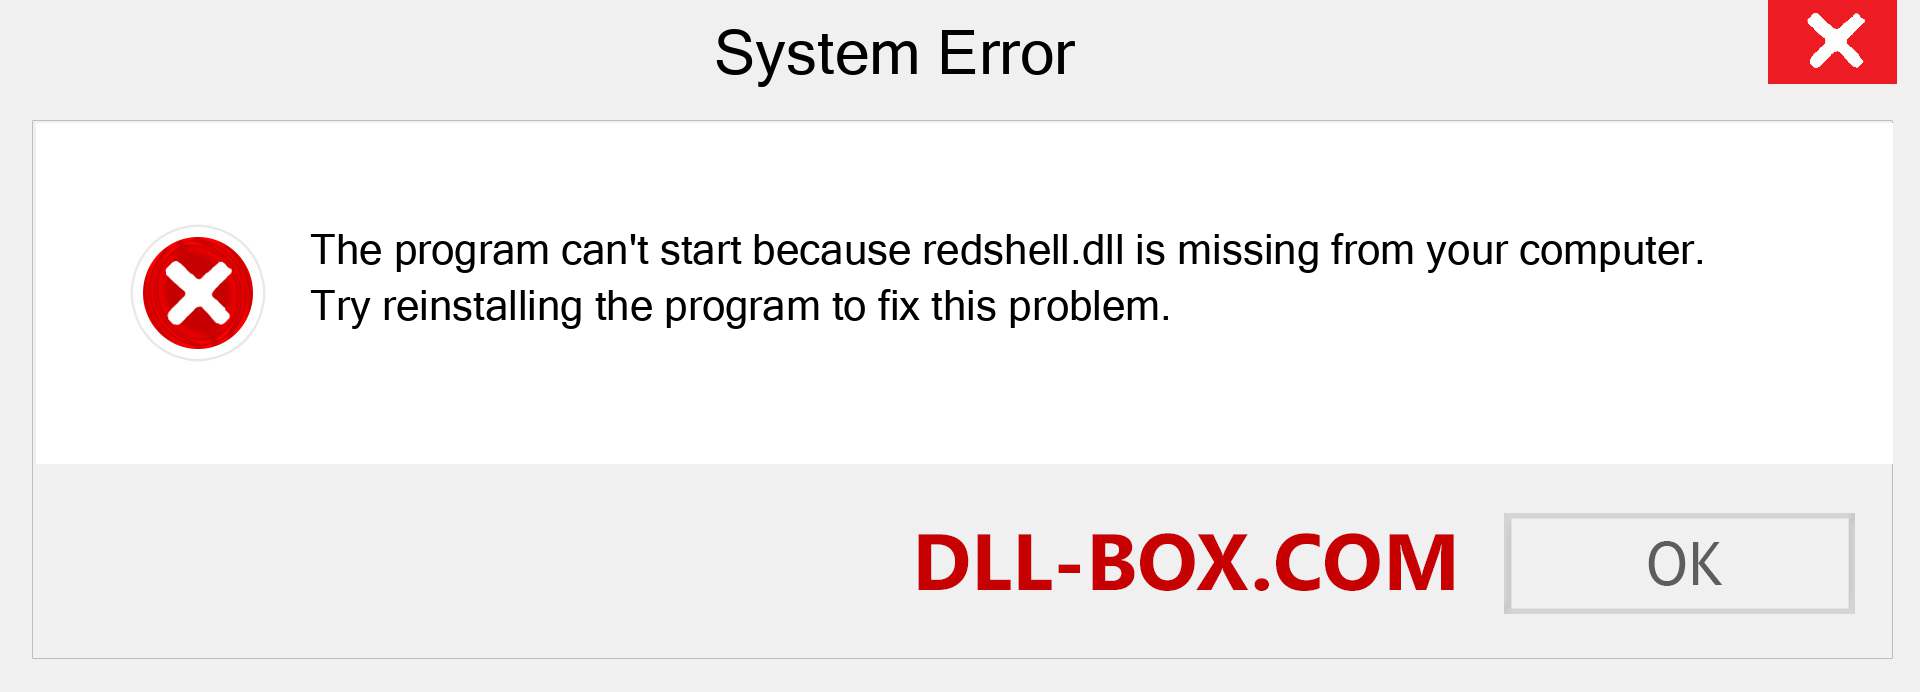  redshell.dll file is missing?. Download for Windows 7, 8, 10 - Fix  redshell dll Missing Error on Windows, photos, images